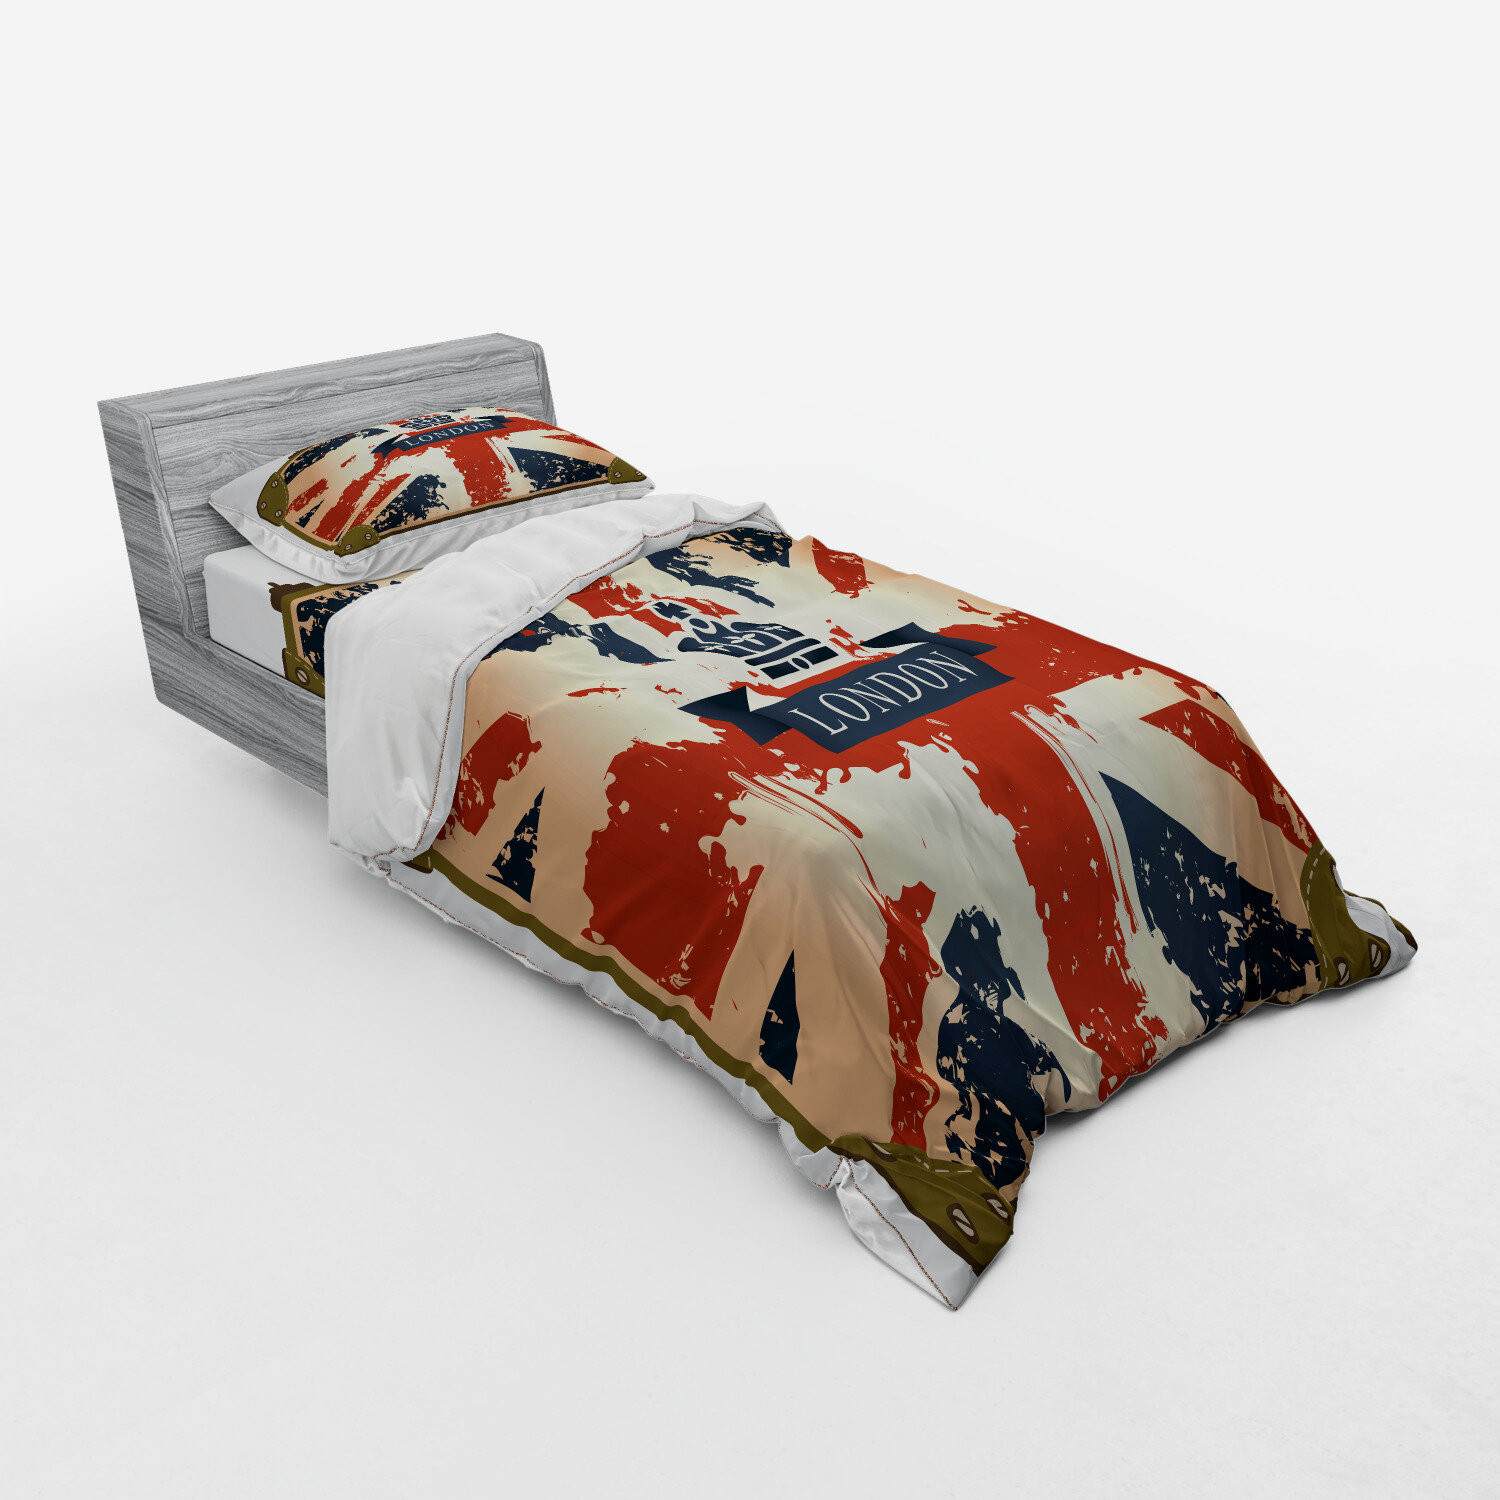 East Urban Home Union Jack Vintage Travel Suitcase With British